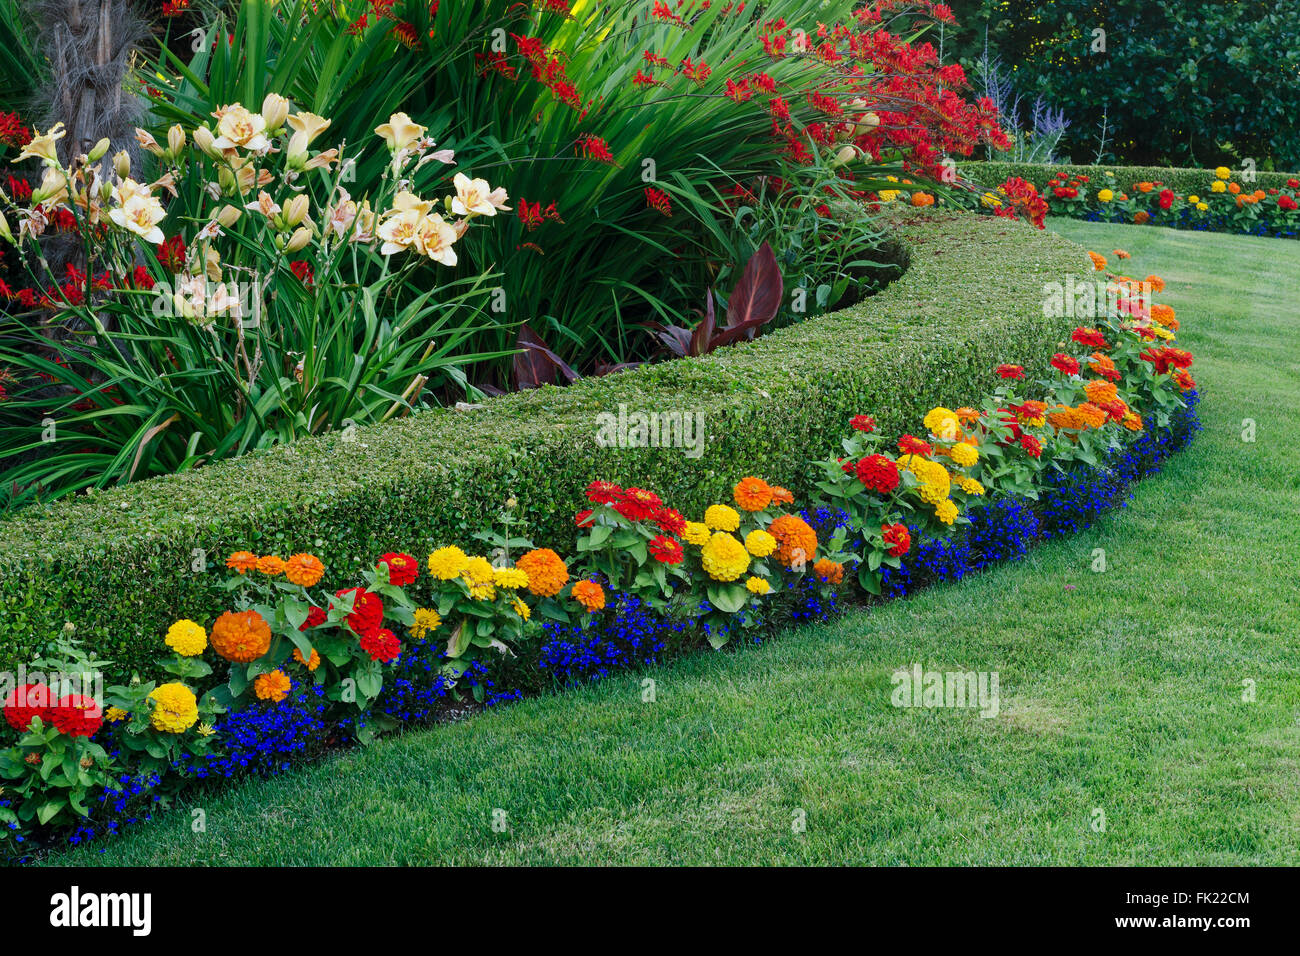 A beautiful garden display featuring a curved boxwood hedge surrounded by a variety of colorful flowers. Stock Photo